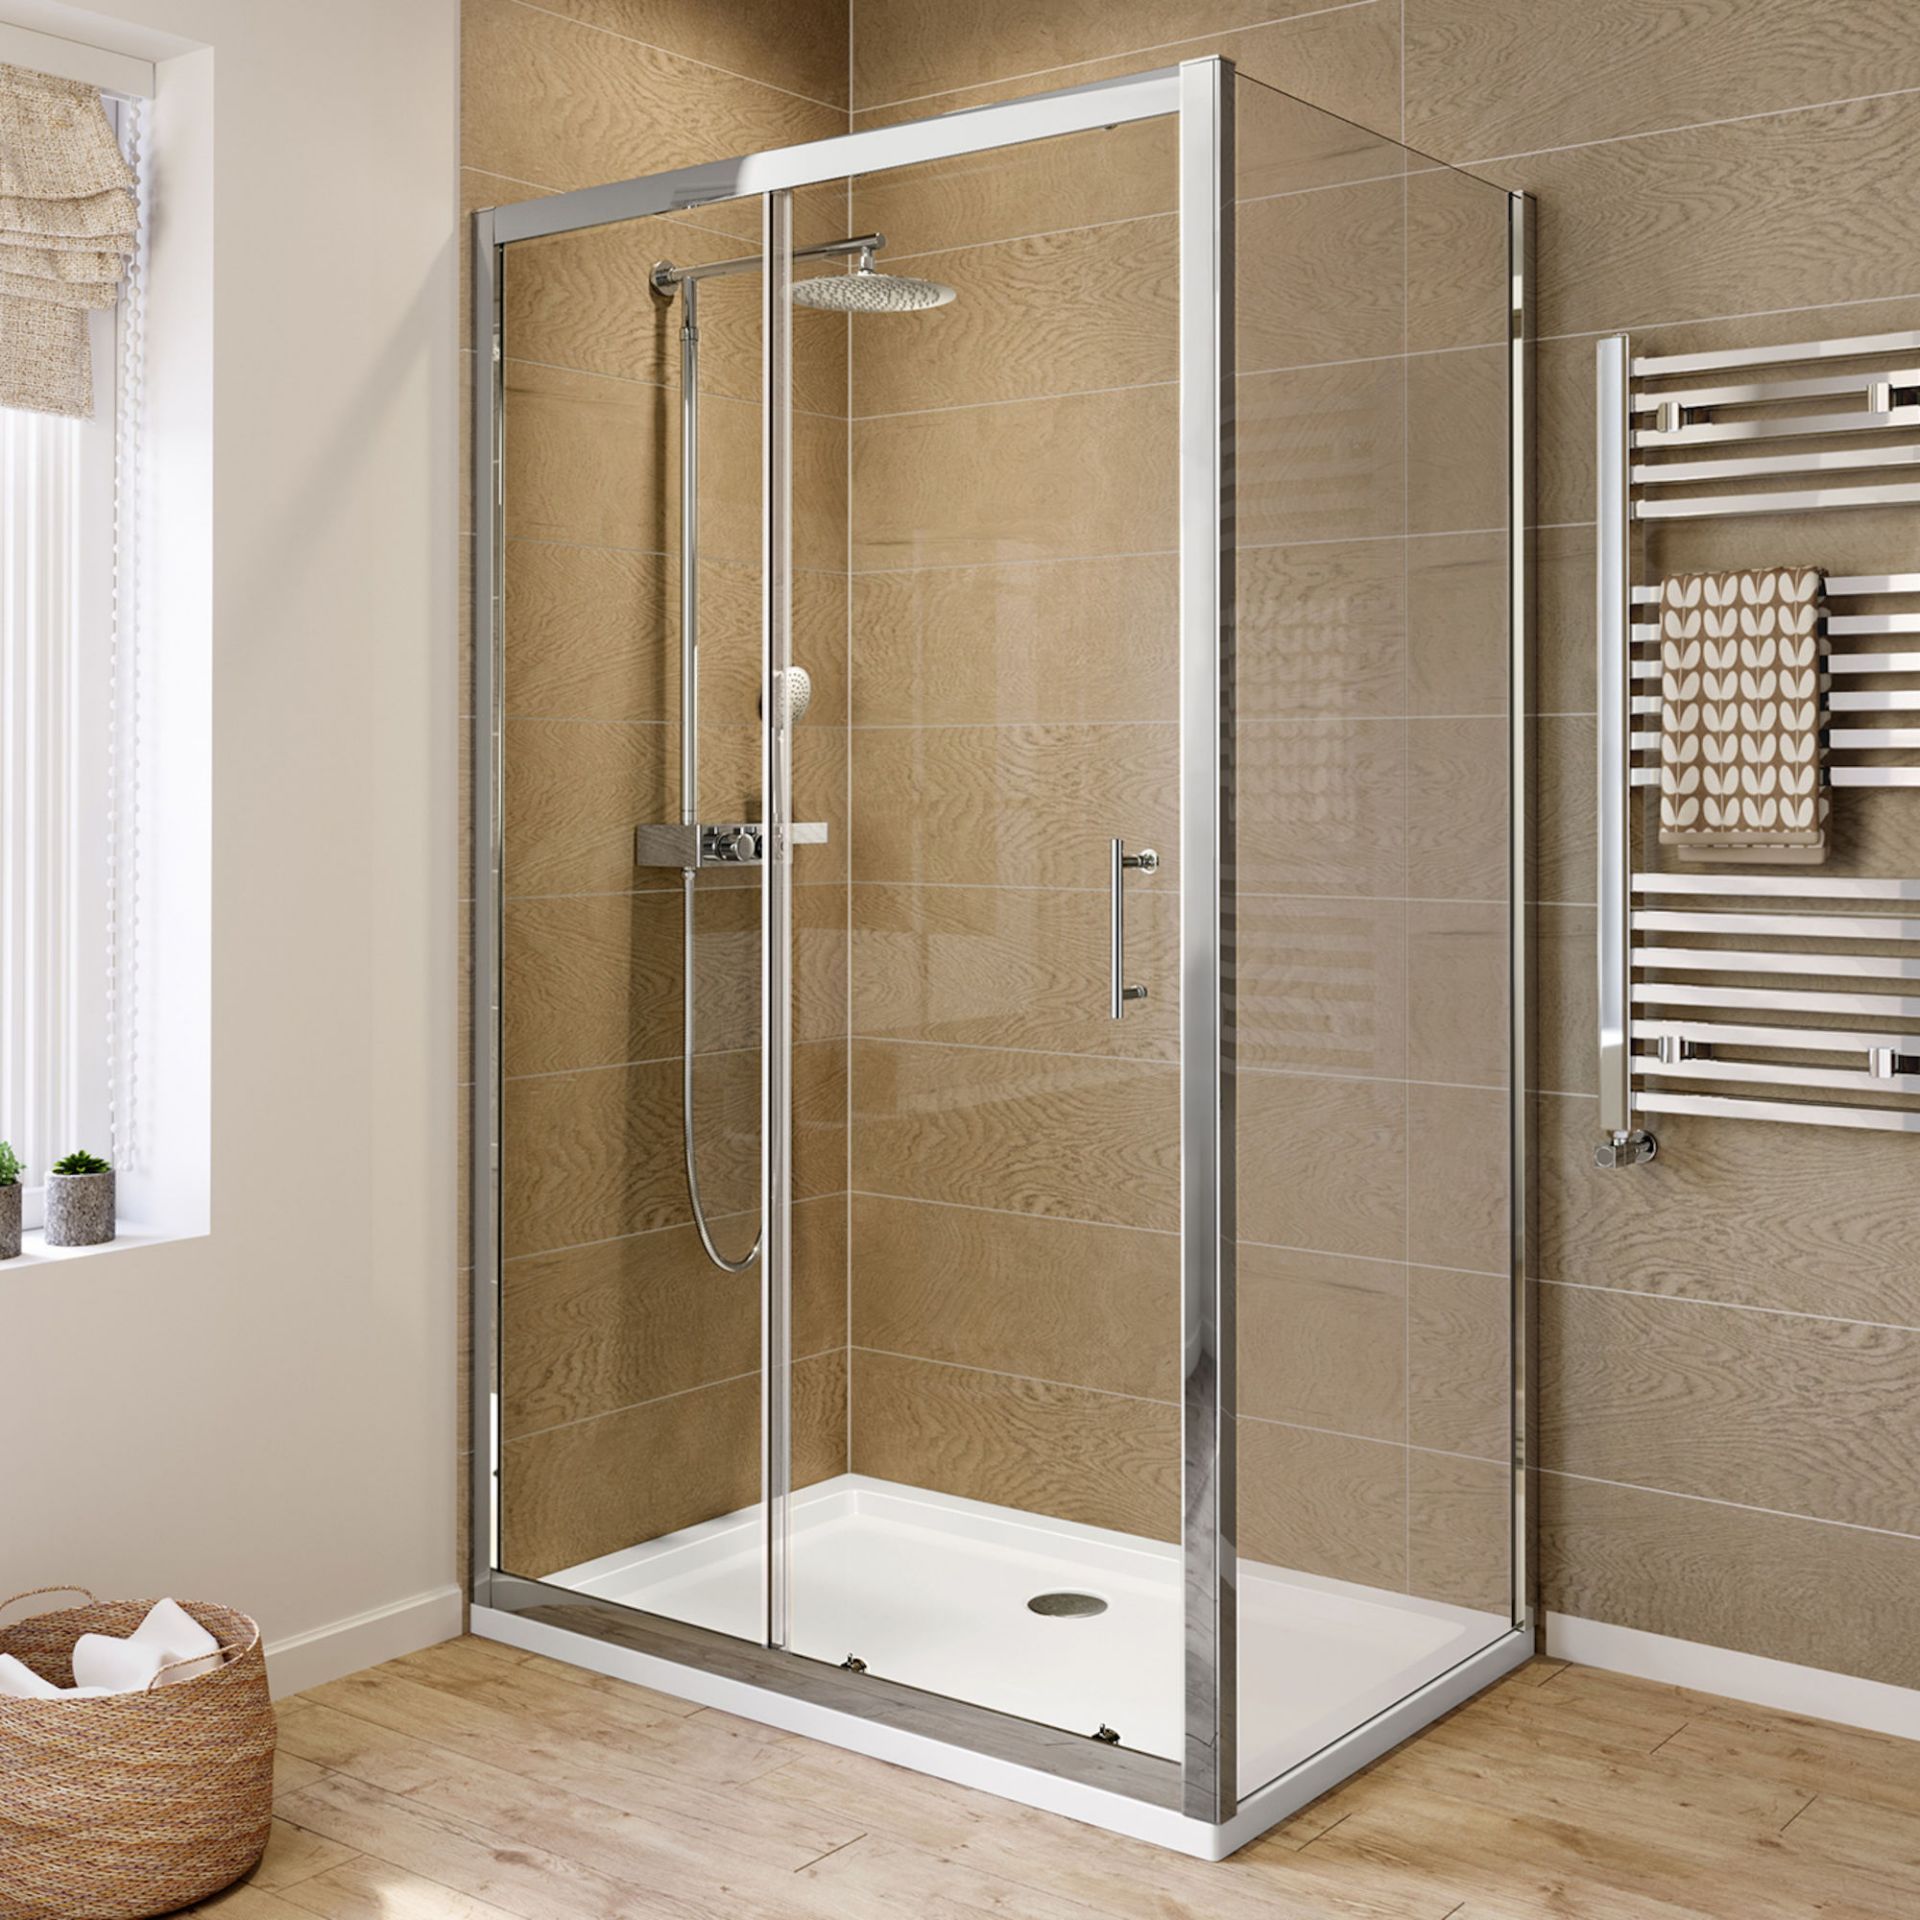 New (K8) 1000x900mm + 1000x900mm Tray Included. - 6mm - Elements Sliding Door Shower Enclosure....